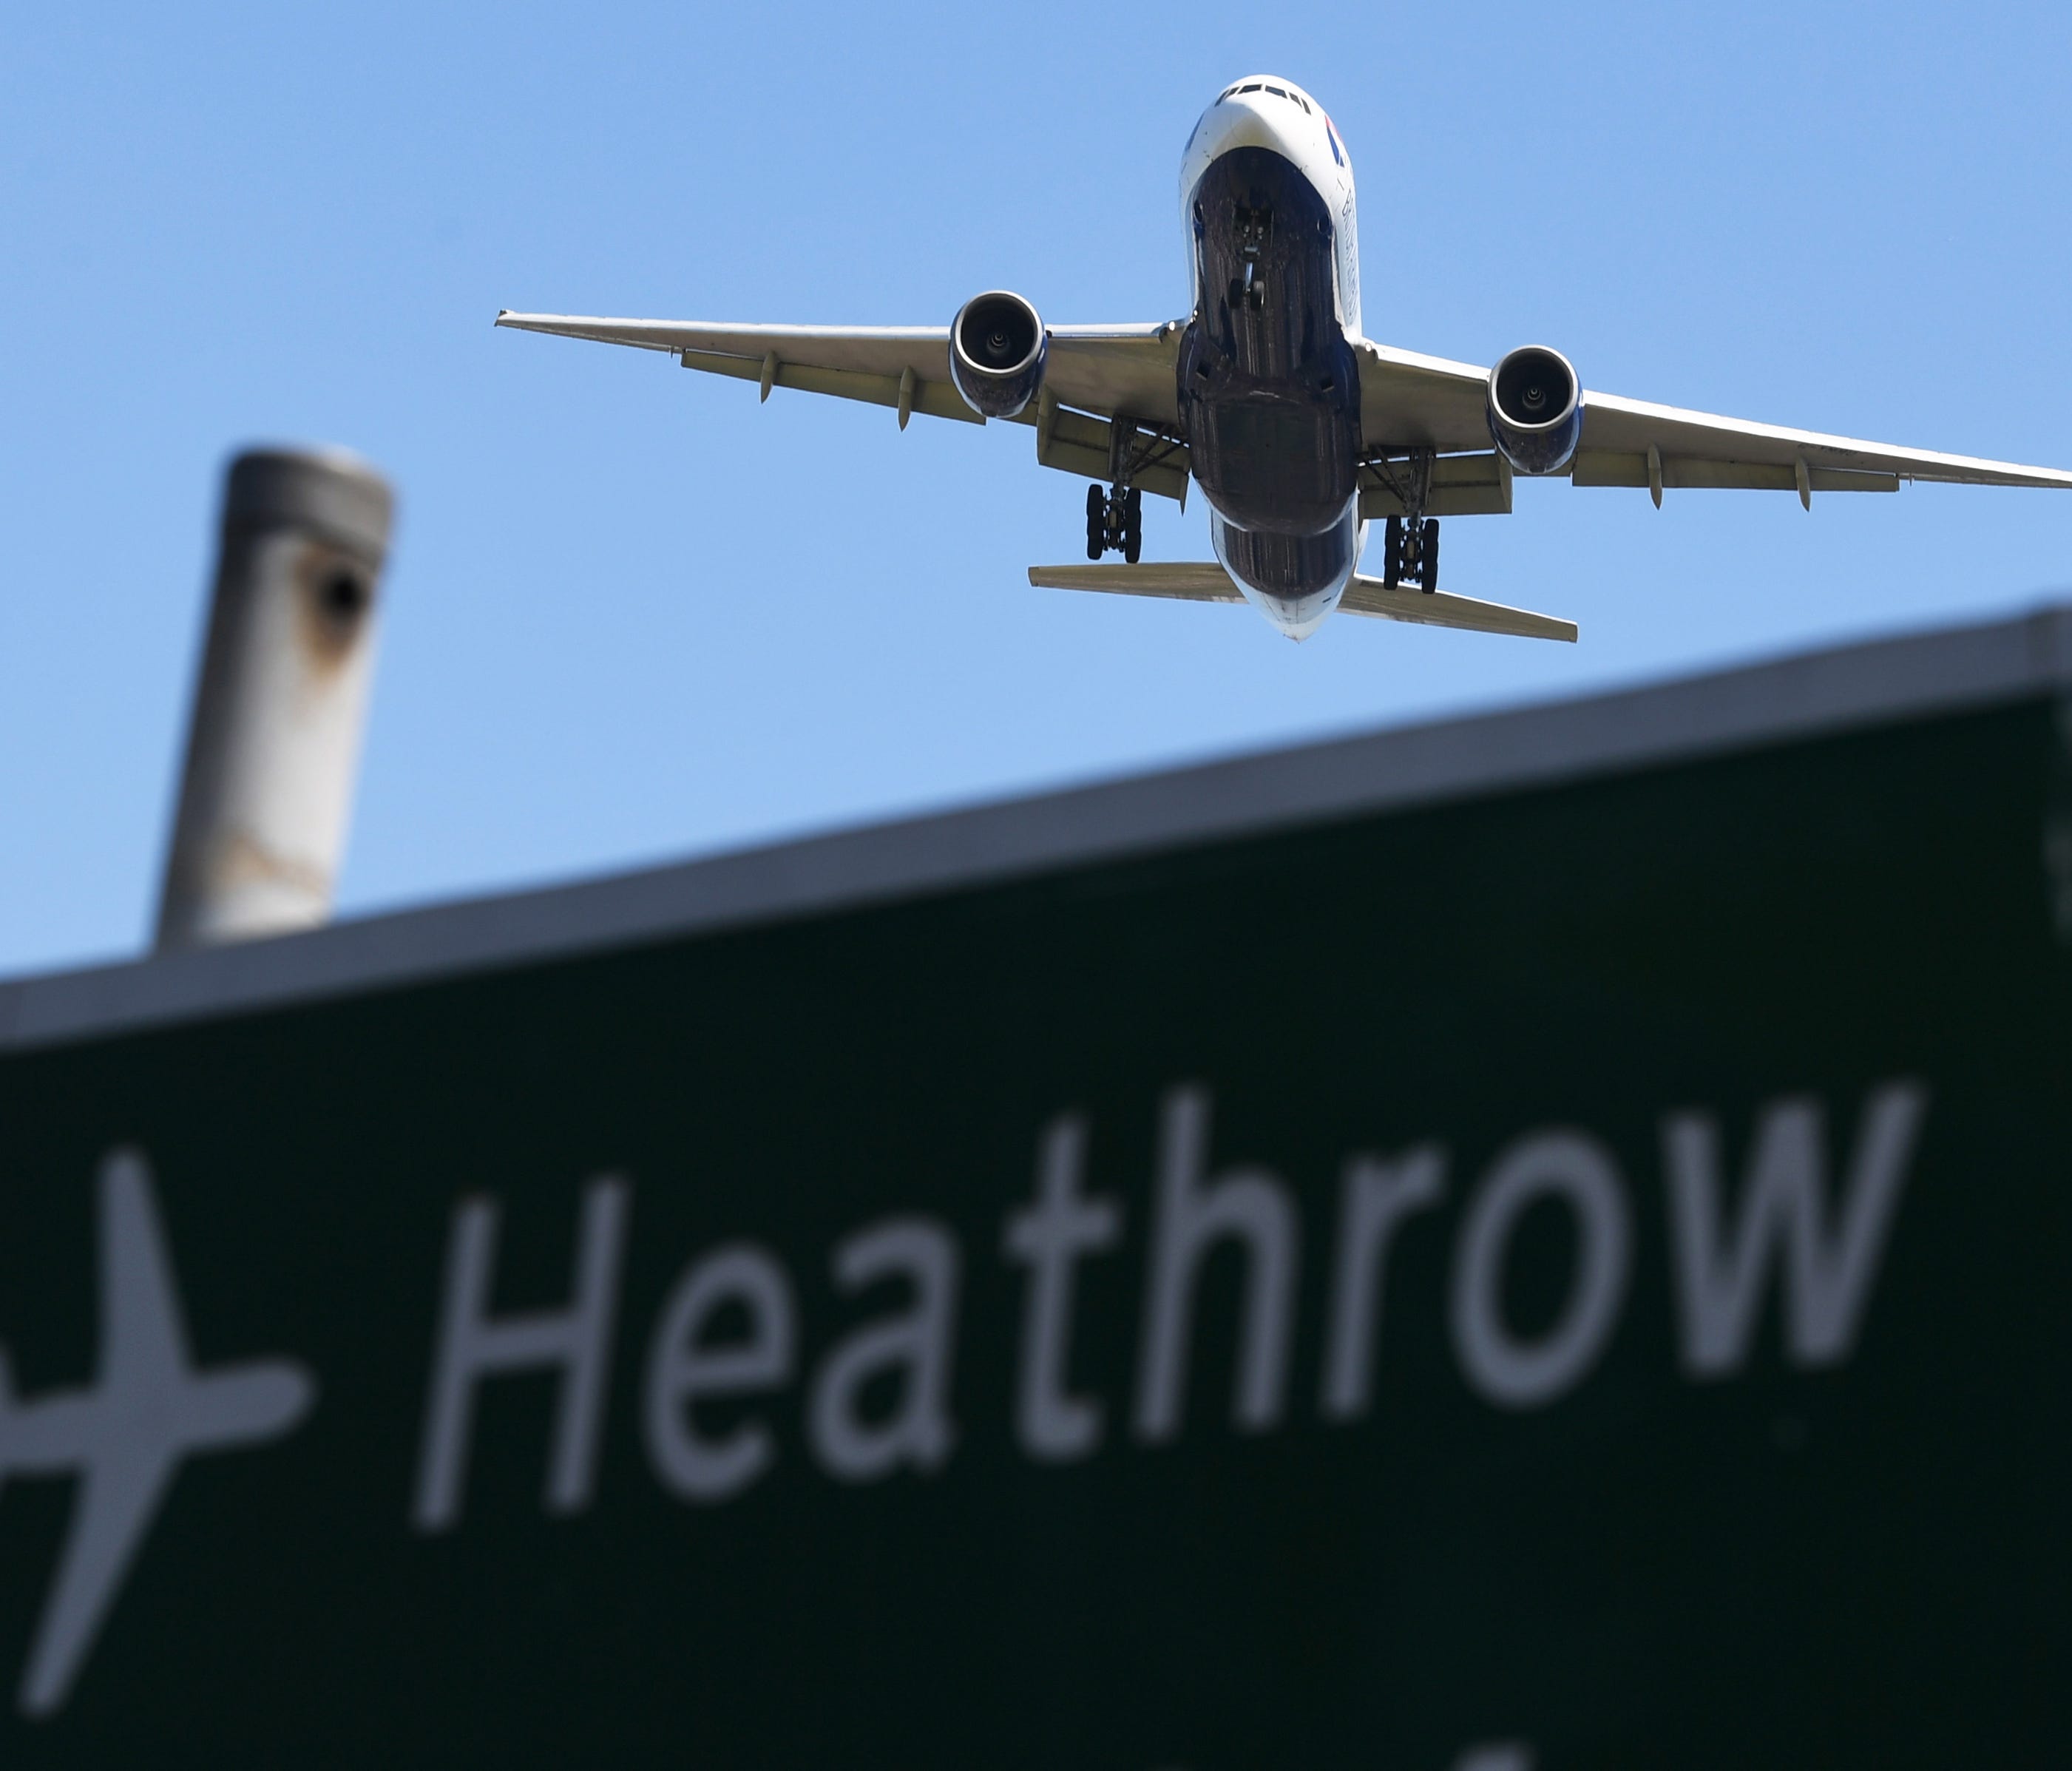 A plane comes into land at London's Heathrow Airport on June 25, 2018.